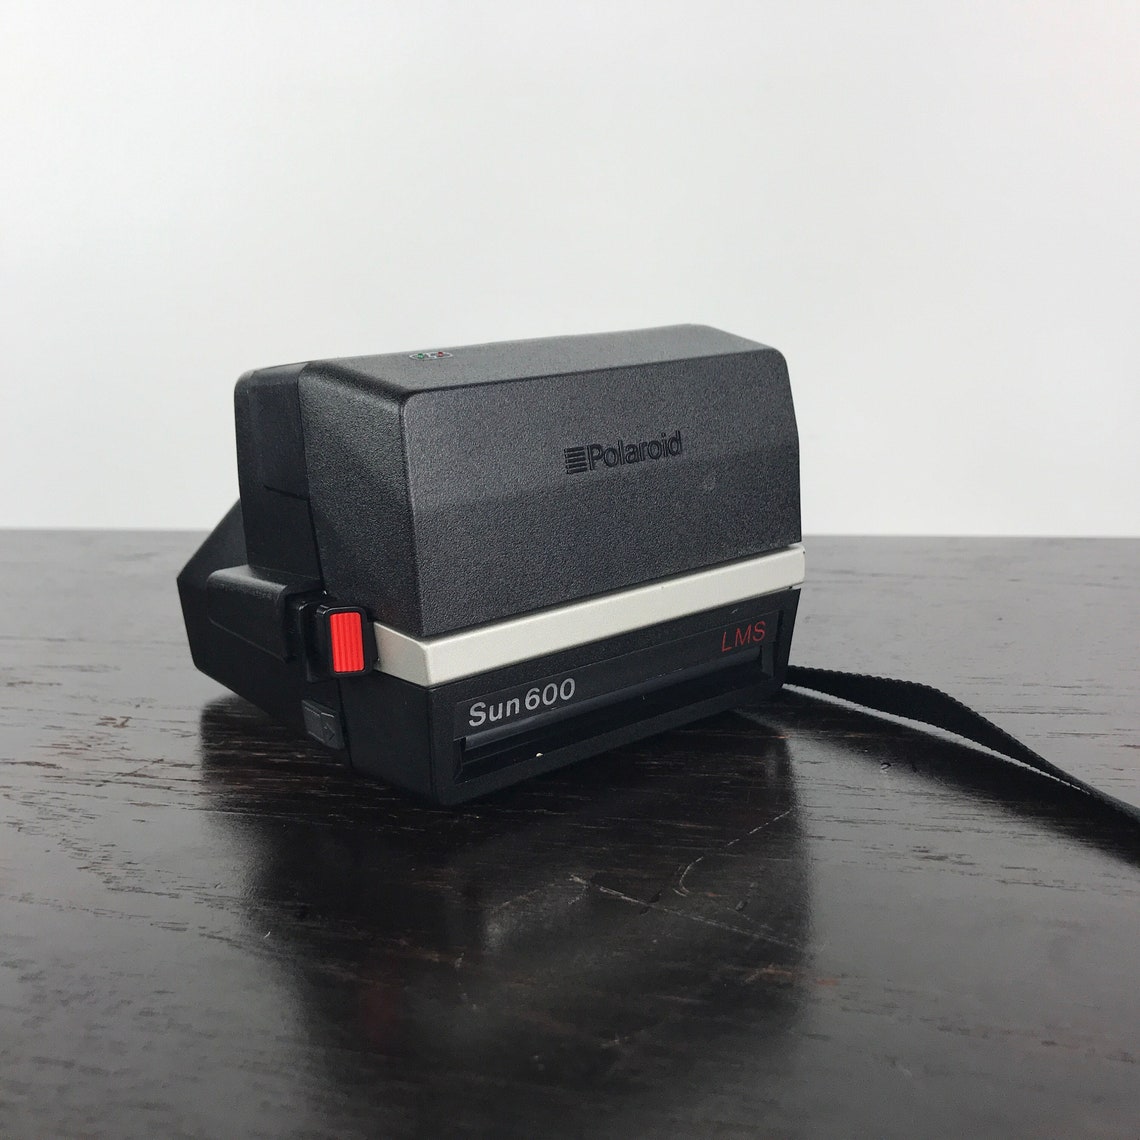 Vintage Polaroid Sun 600 Lms Instant Camera Tested Excellent Etsy